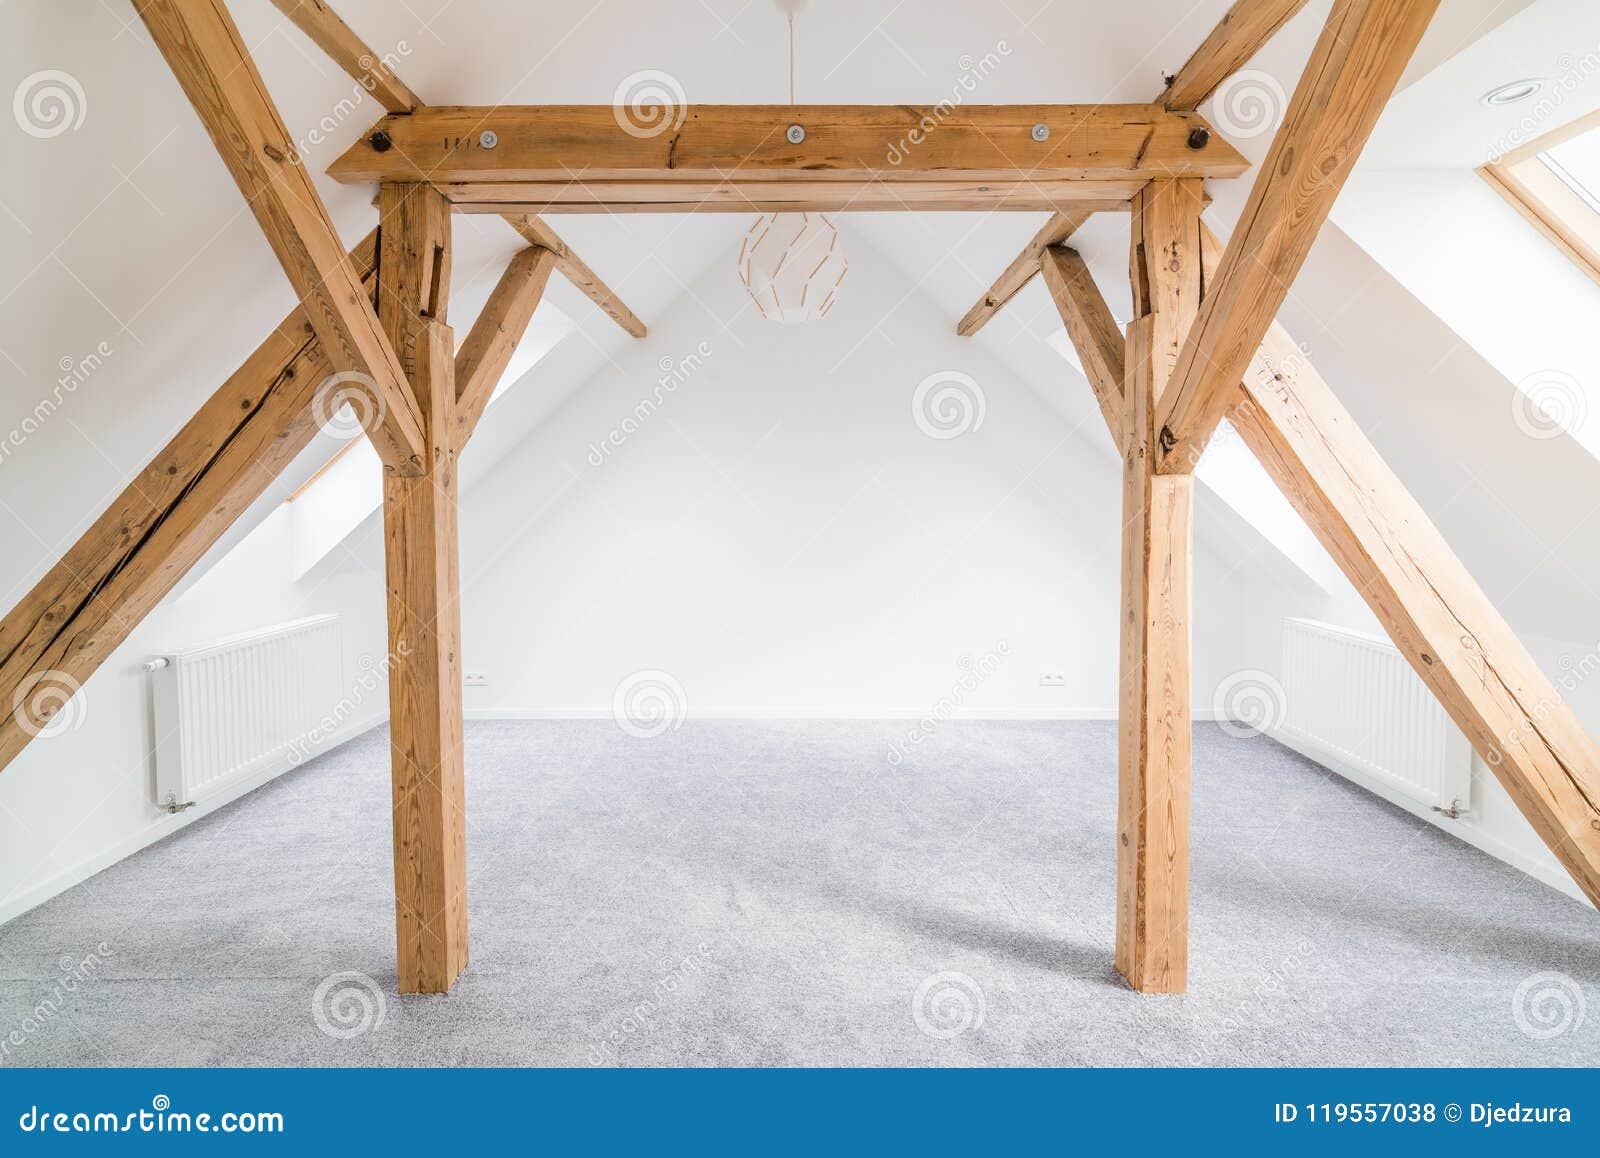 Empty Attic Room With Wooden Ceiling Beams Stock Photo